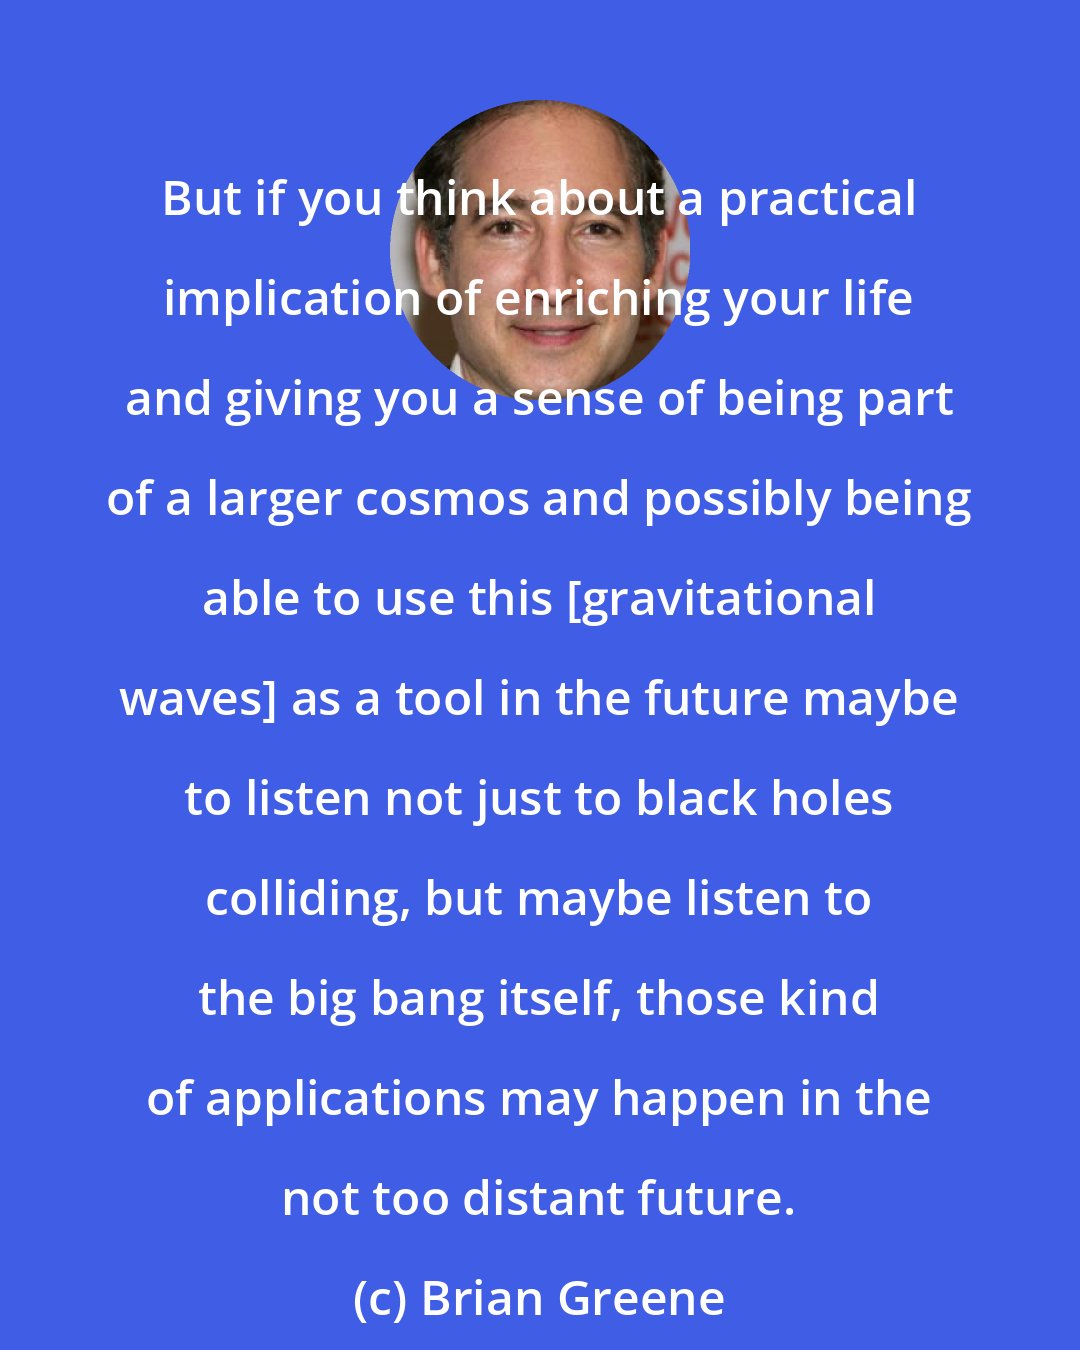 Brian Greene: But if you think about a practical implication of enriching your life and giving you a sense of being part of a larger cosmos and possibly being able to use this [gravitational waves] as a tool in the future maybe to listen not just to black holes colliding, but maybe listen to the big bang itself, those kind of applications may happen in the not too distant future.